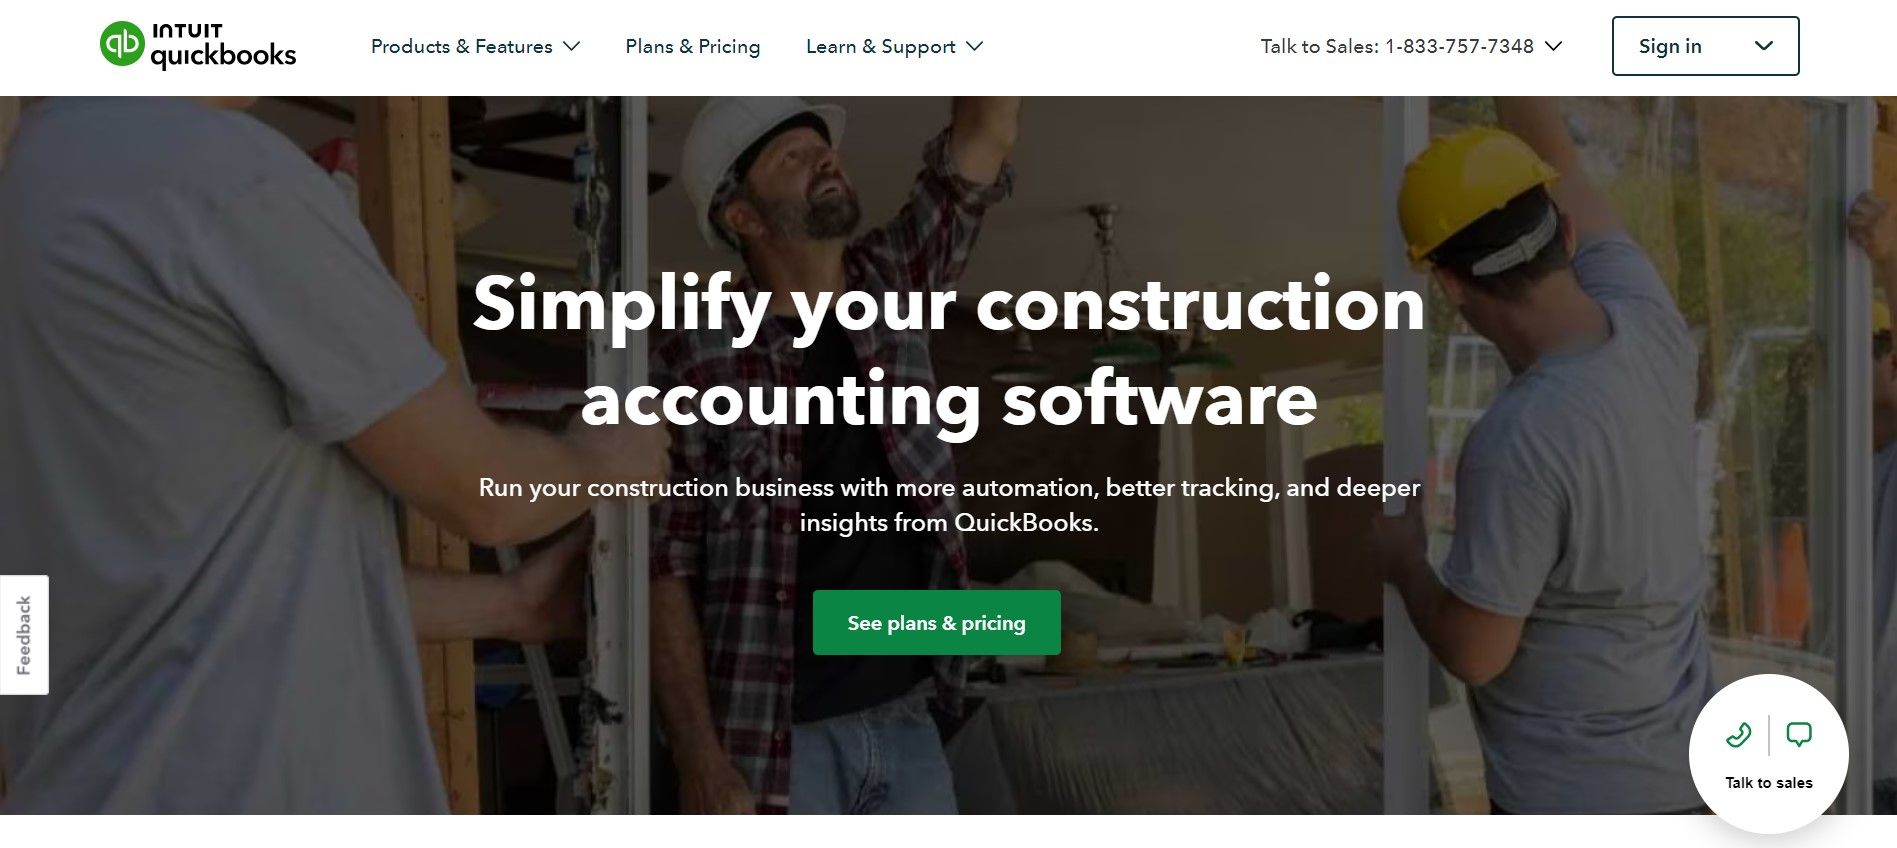 Homepage of Quickbooks saying 'simplify you construction accounting software'